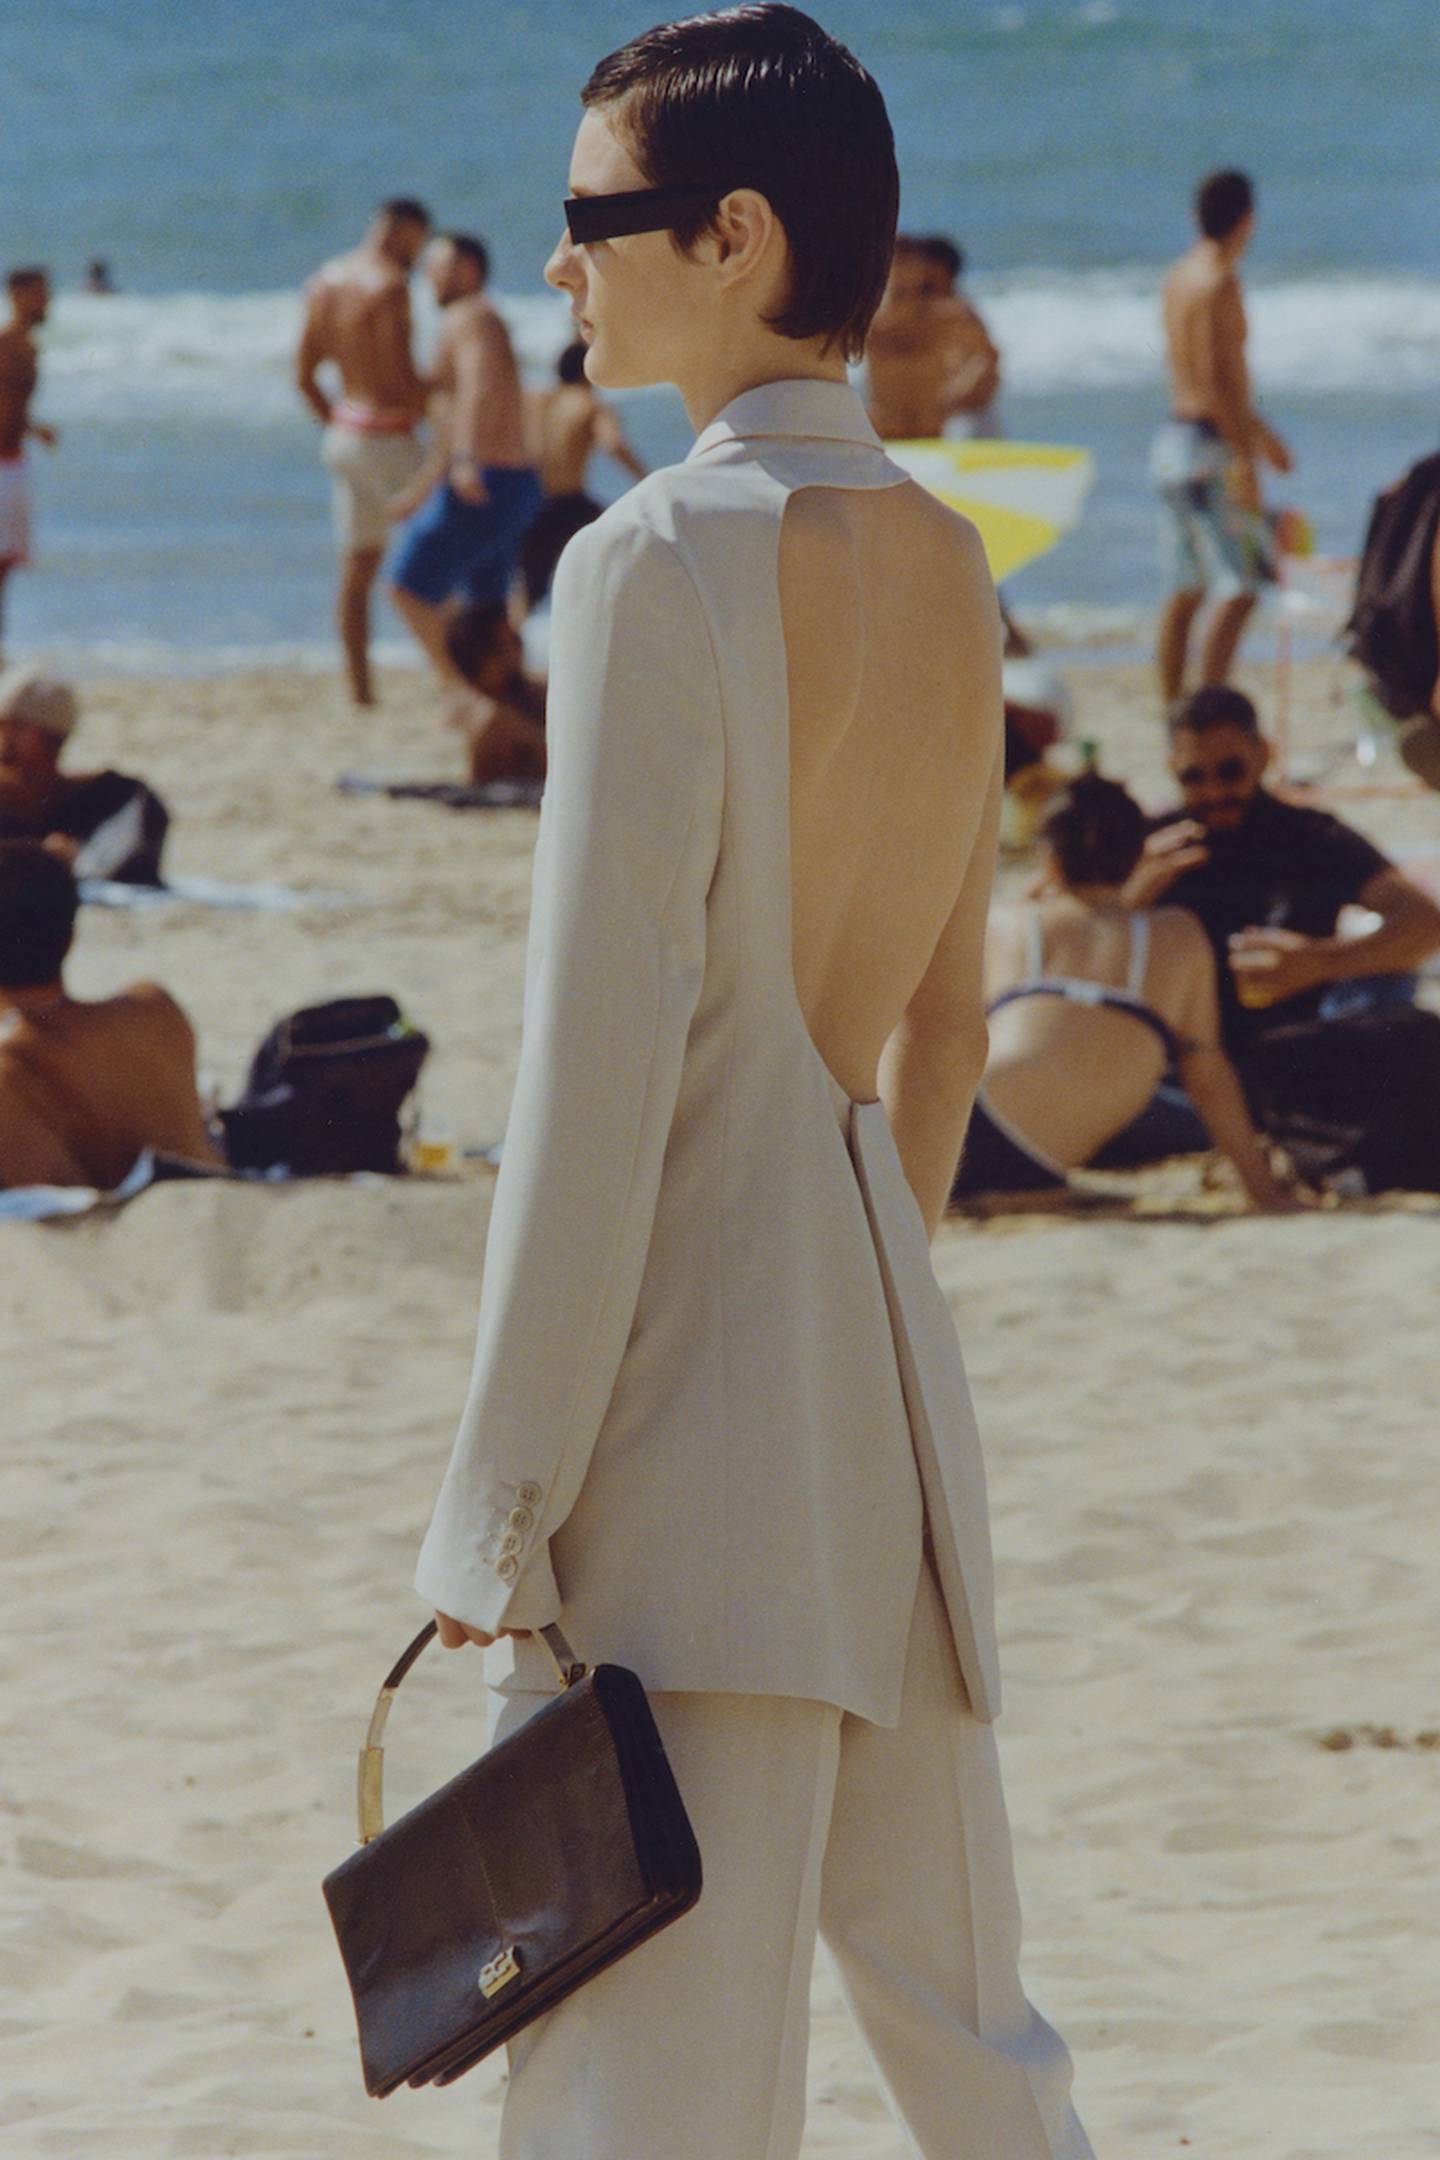 A model in a sand-coloured backless suit stands on the beach.